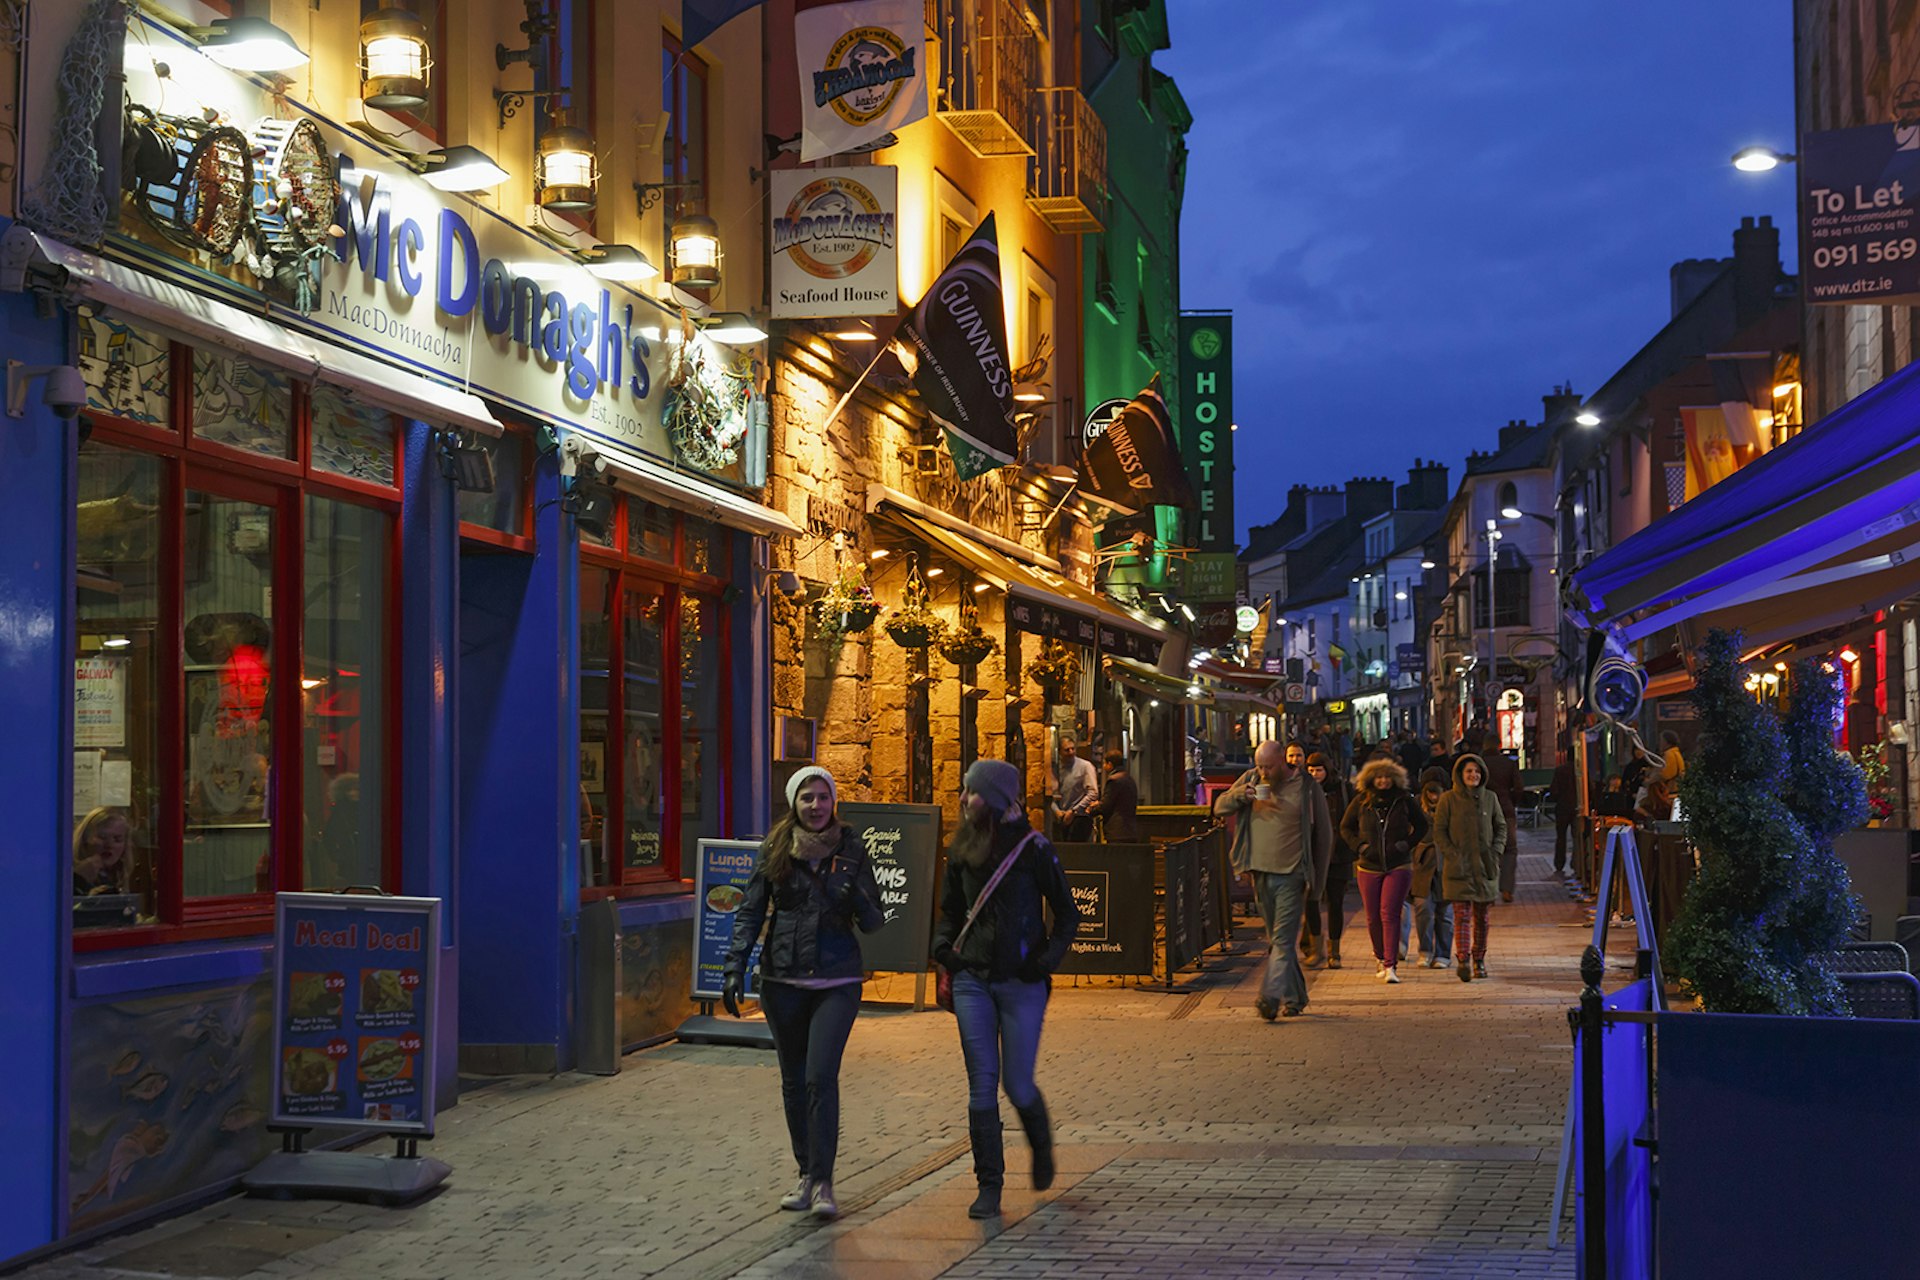 Galway city is a swirl of enticing old pubs humming with trad music sessions